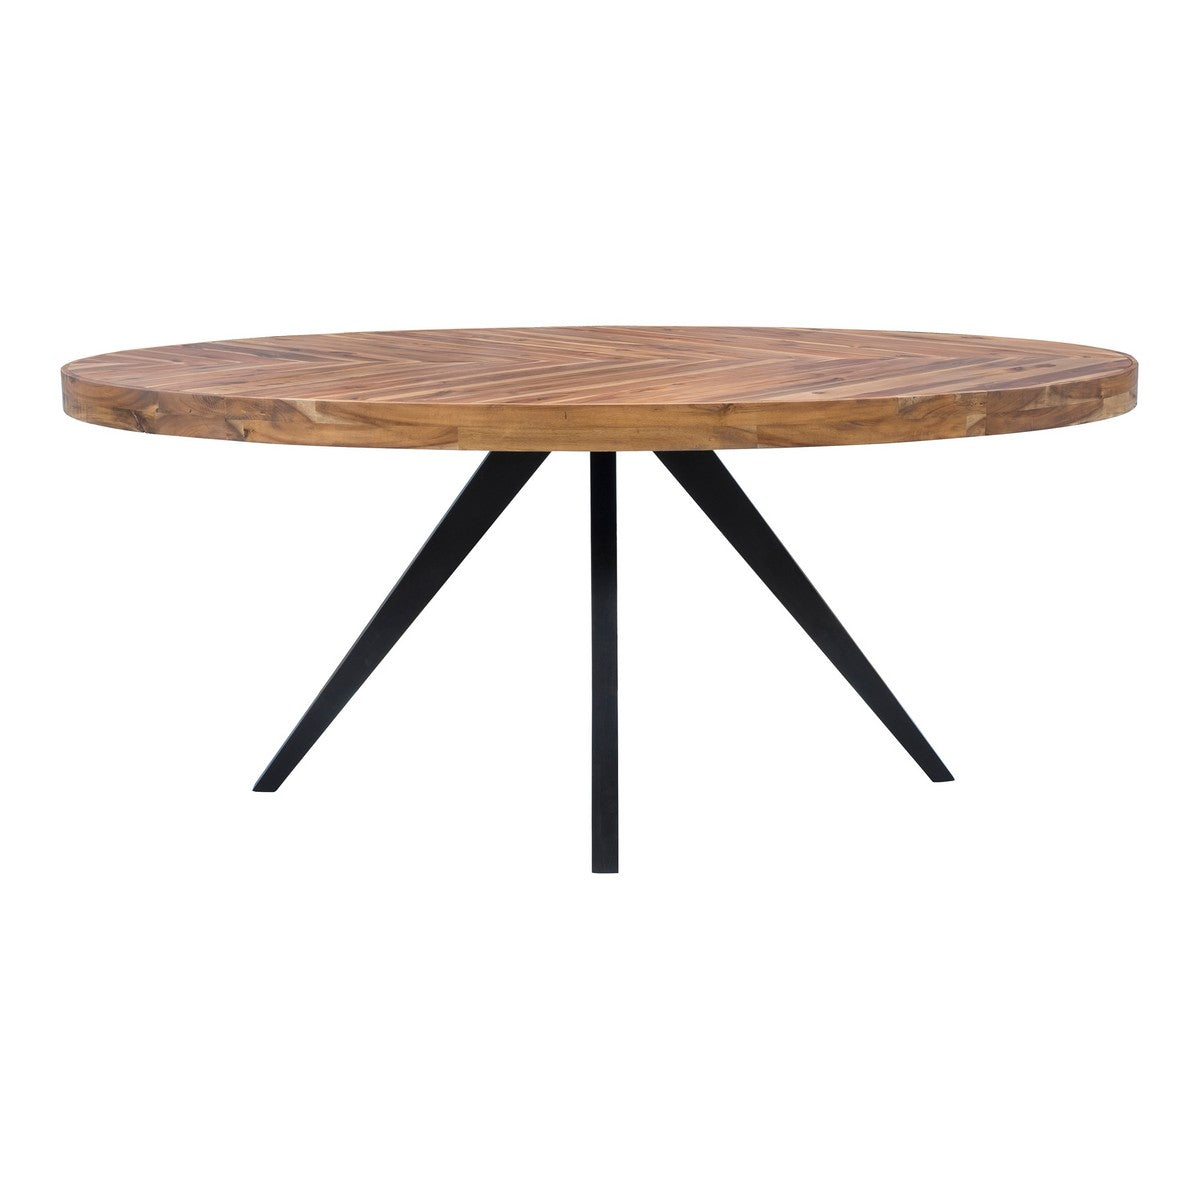 Moe's Home Collection Parq Oval Dining Table - TL-1019-14